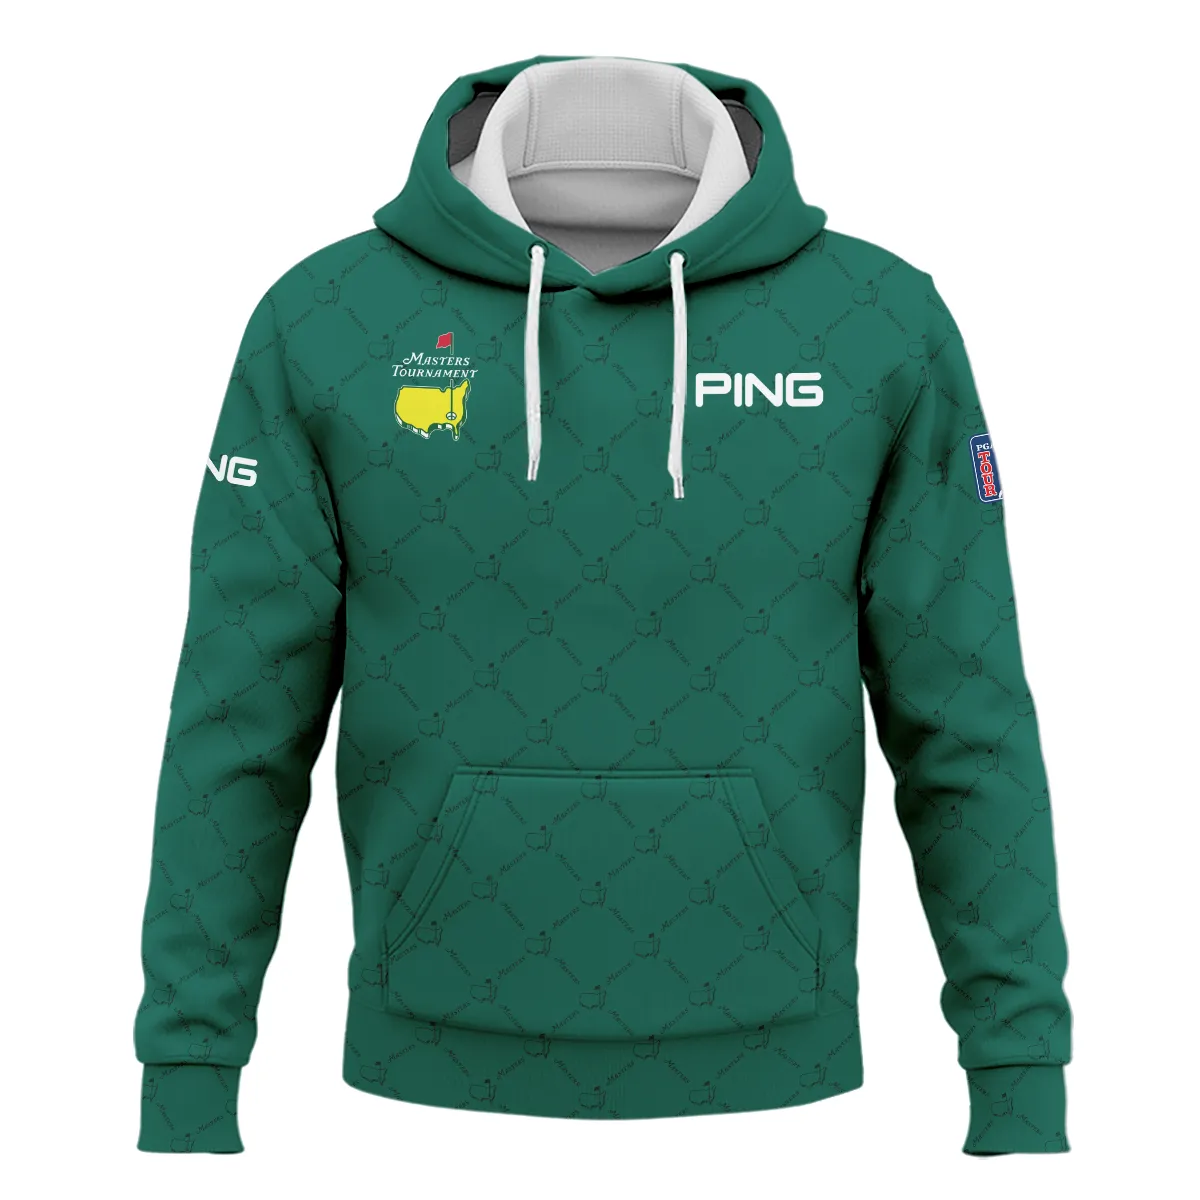 Golf Sport Pattern Color Green Mix Black Masters Tournament Ping Hoodie Shirt Style Classic